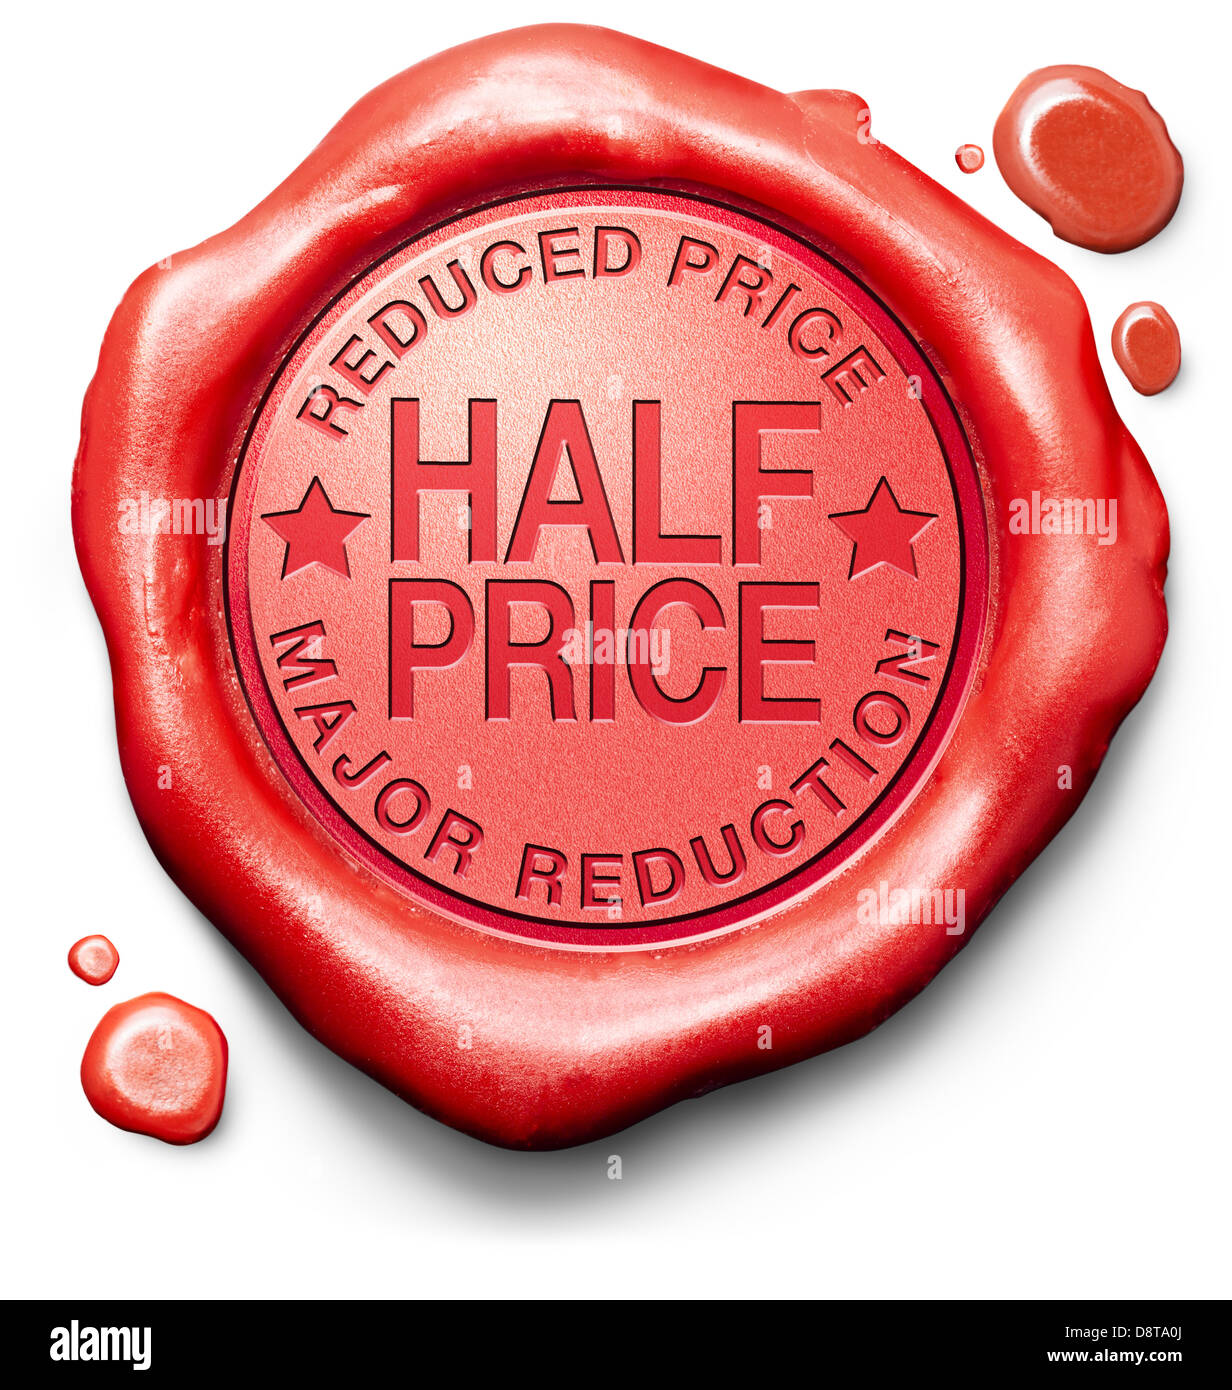 half price major reduction highly reduced prices bargain sale online web shop or internet webshop red icon stamp button or label Stock Photo